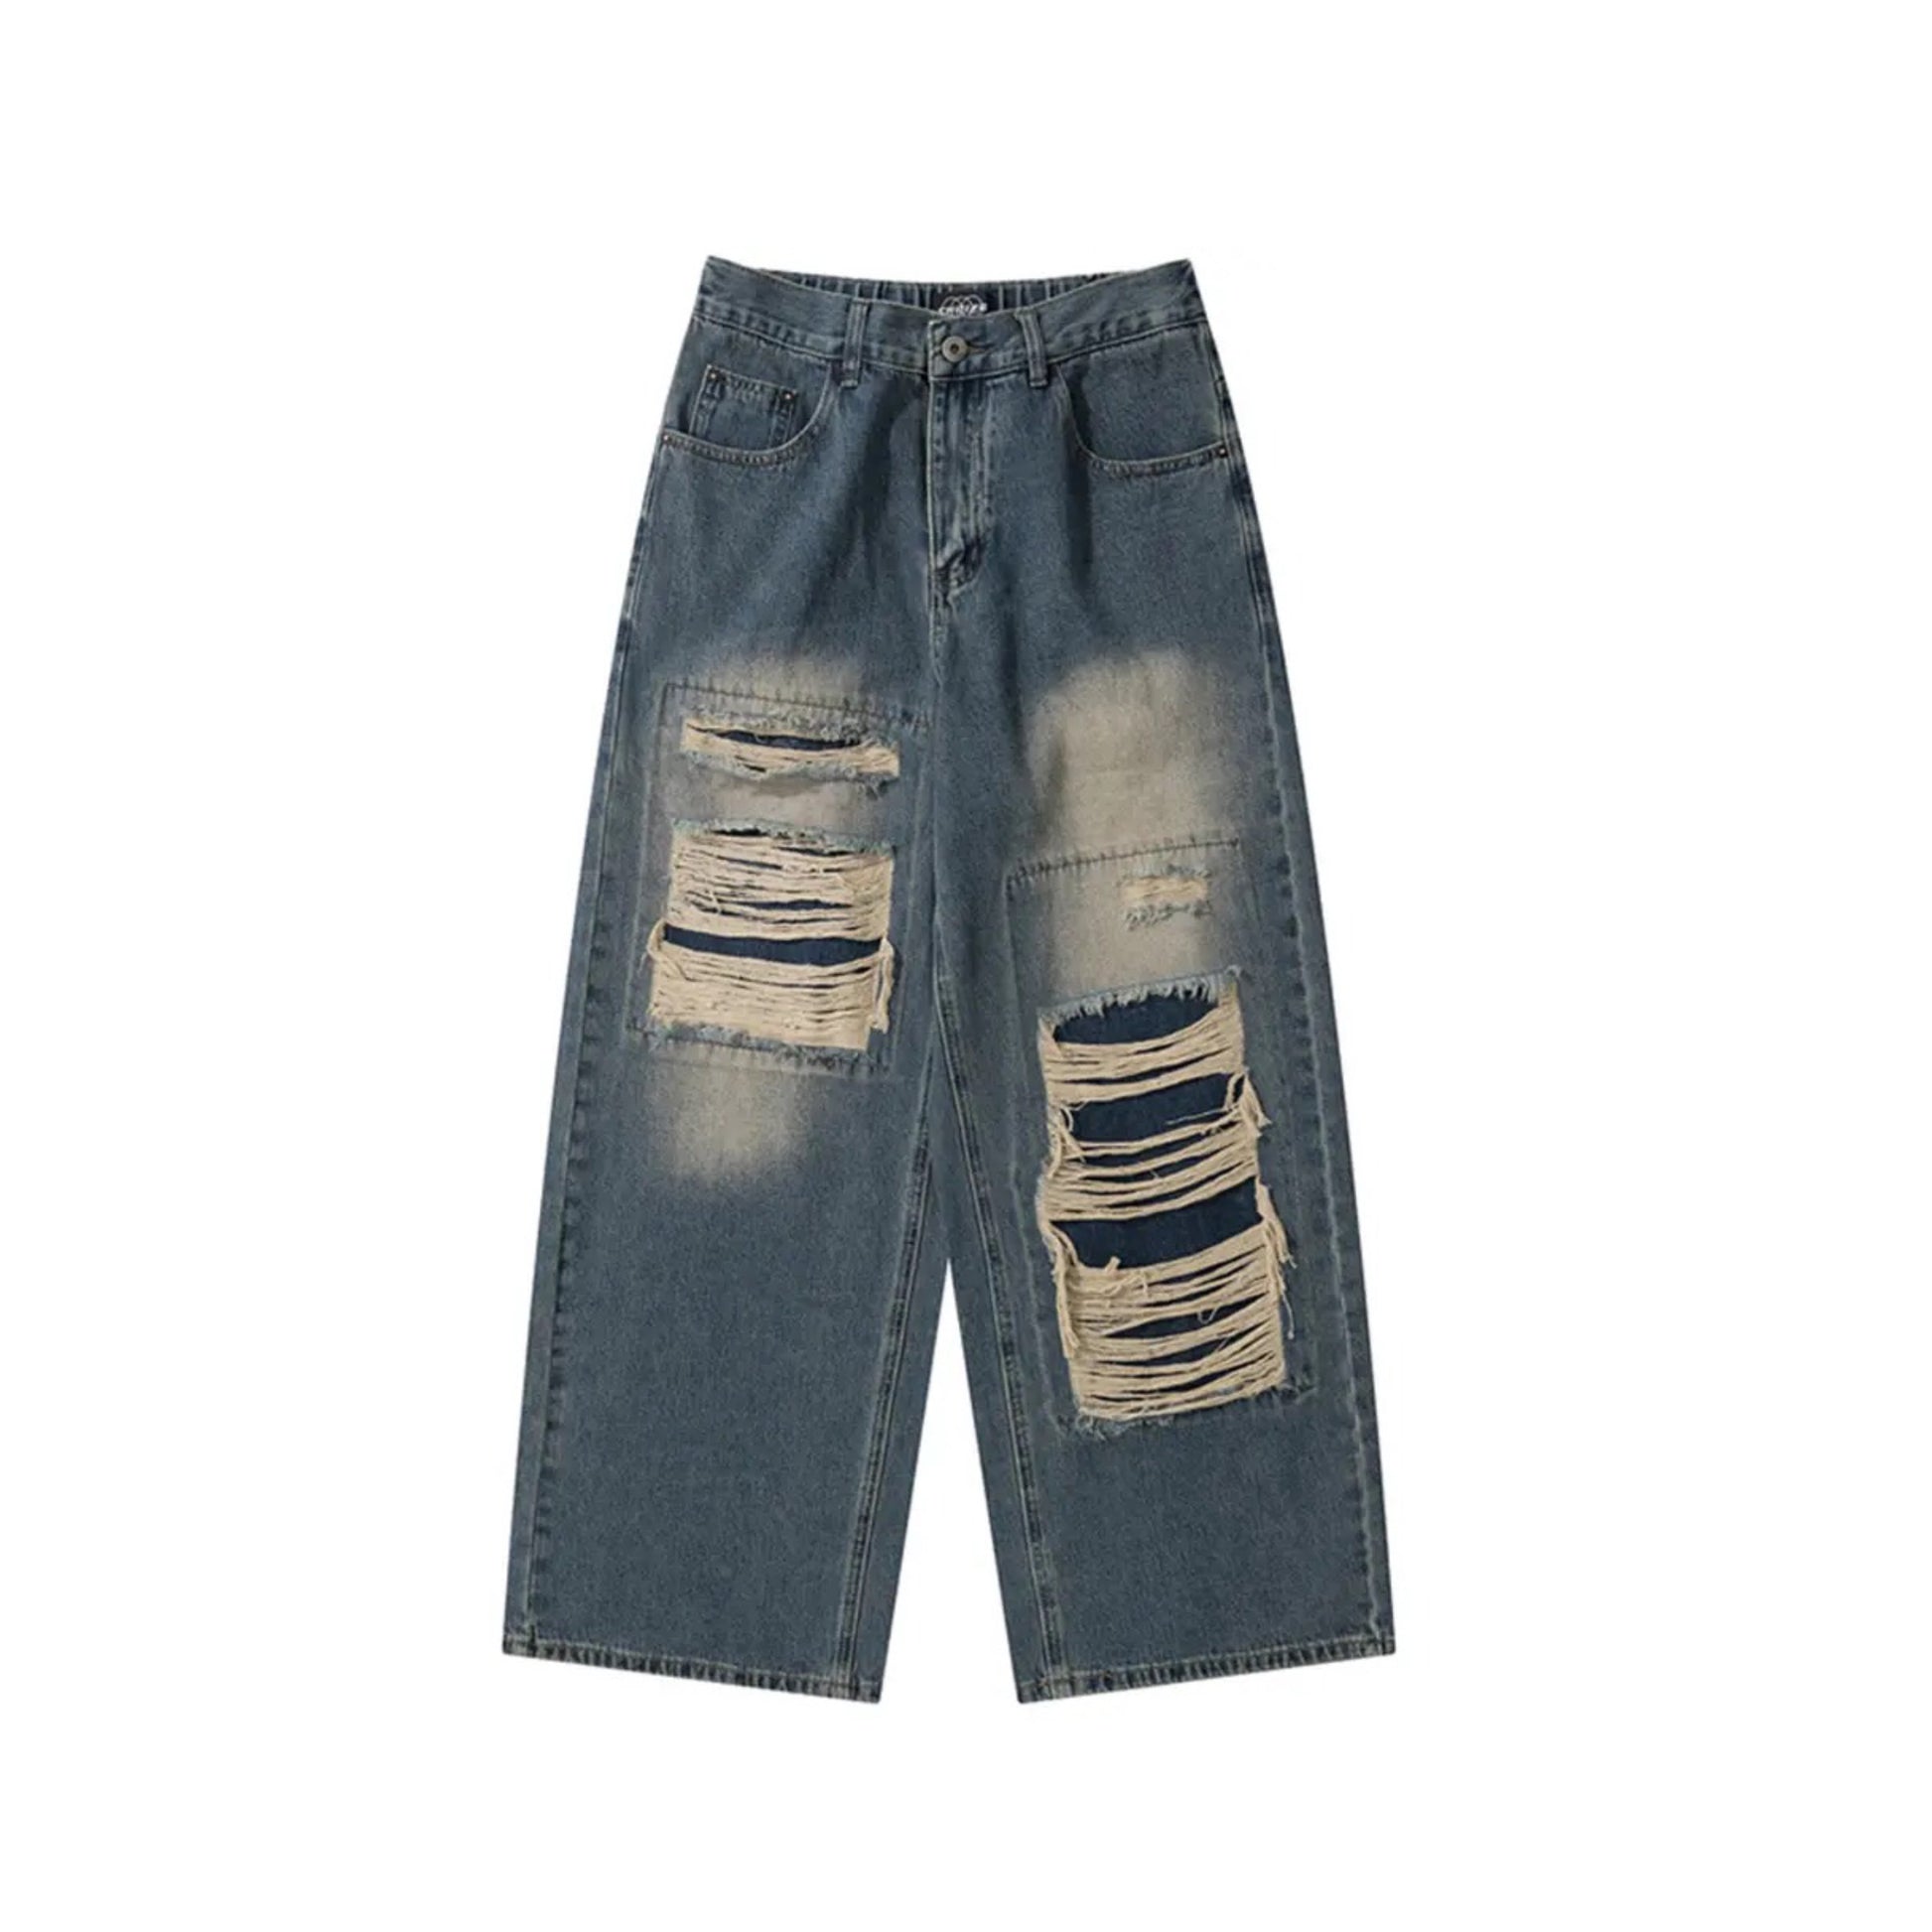 Classic Patched Jeans